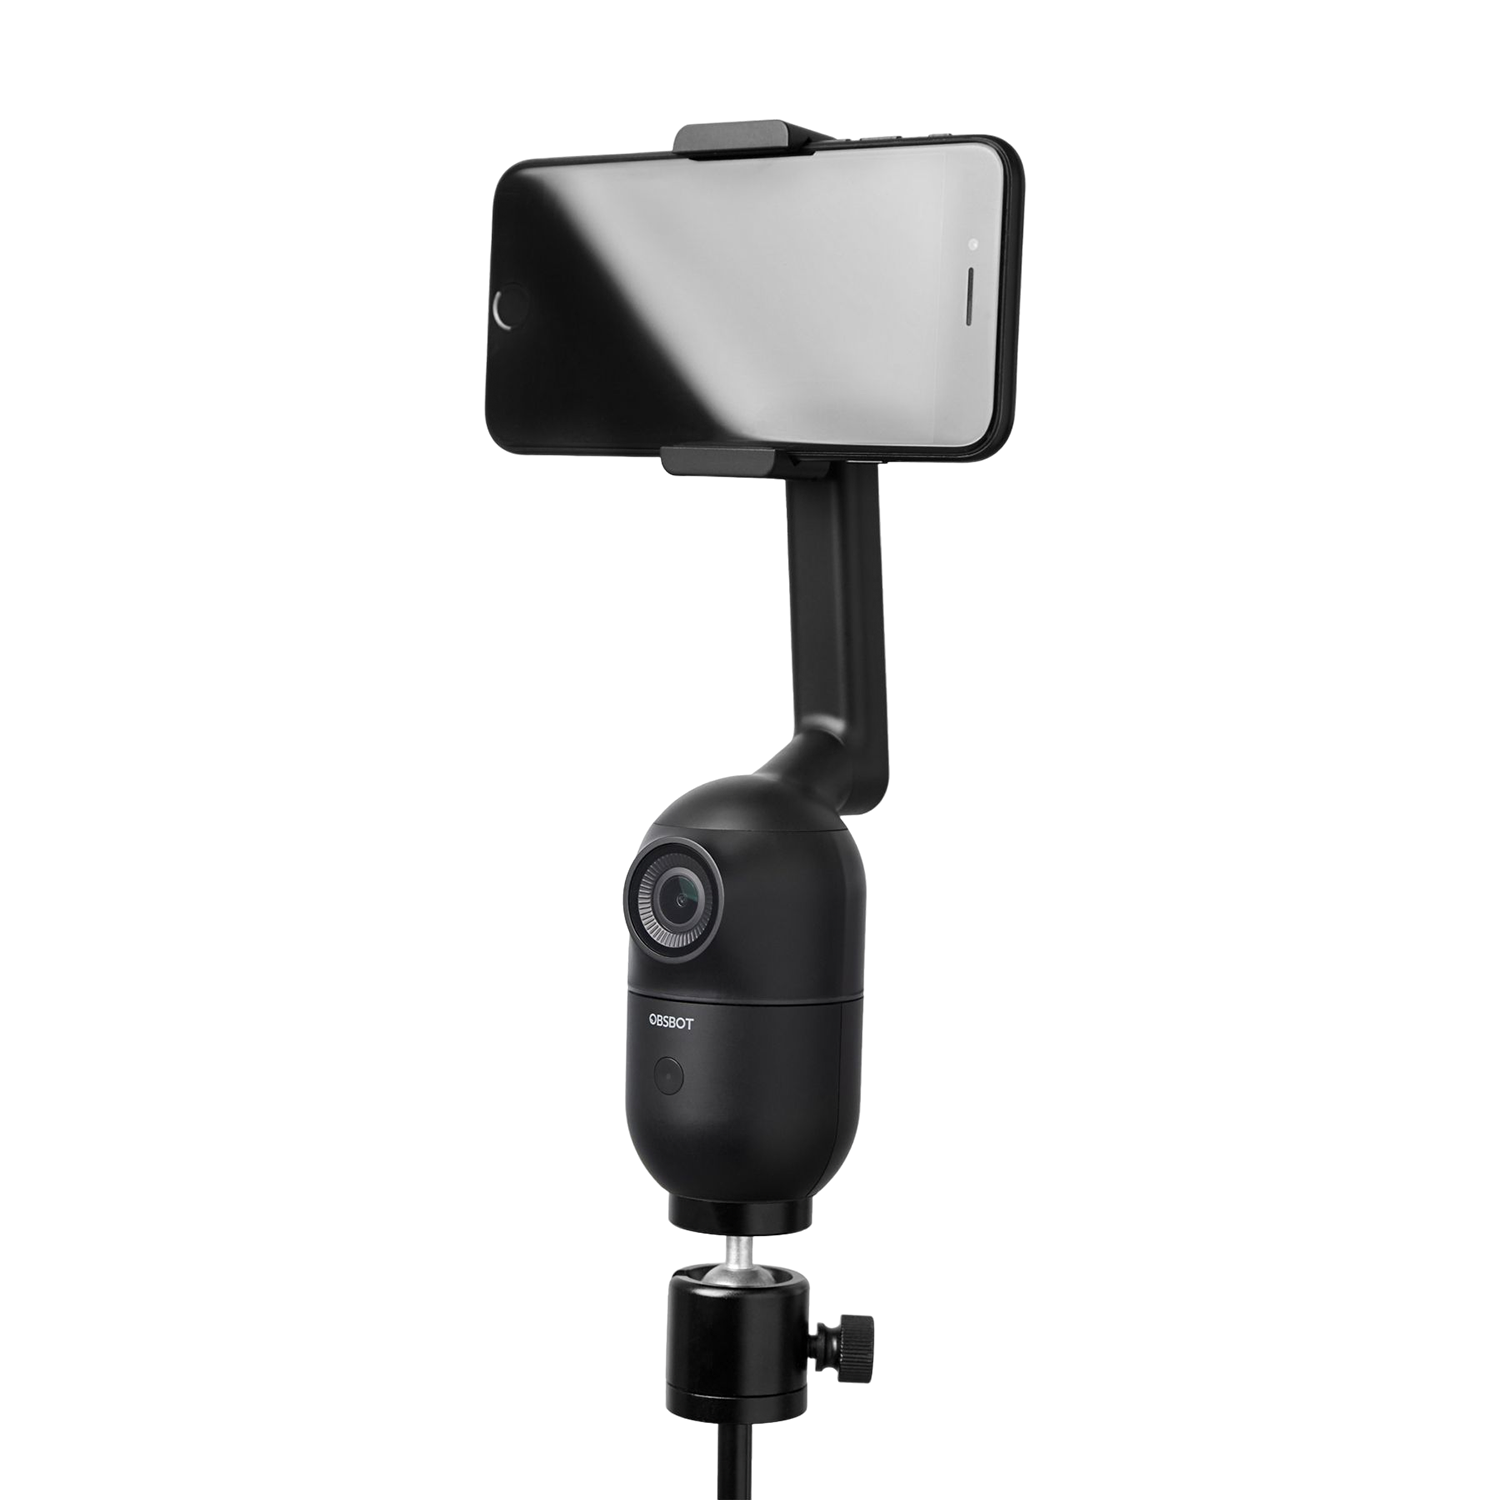 OBSBOT Me Auto-tracking Selfie Mount Phone